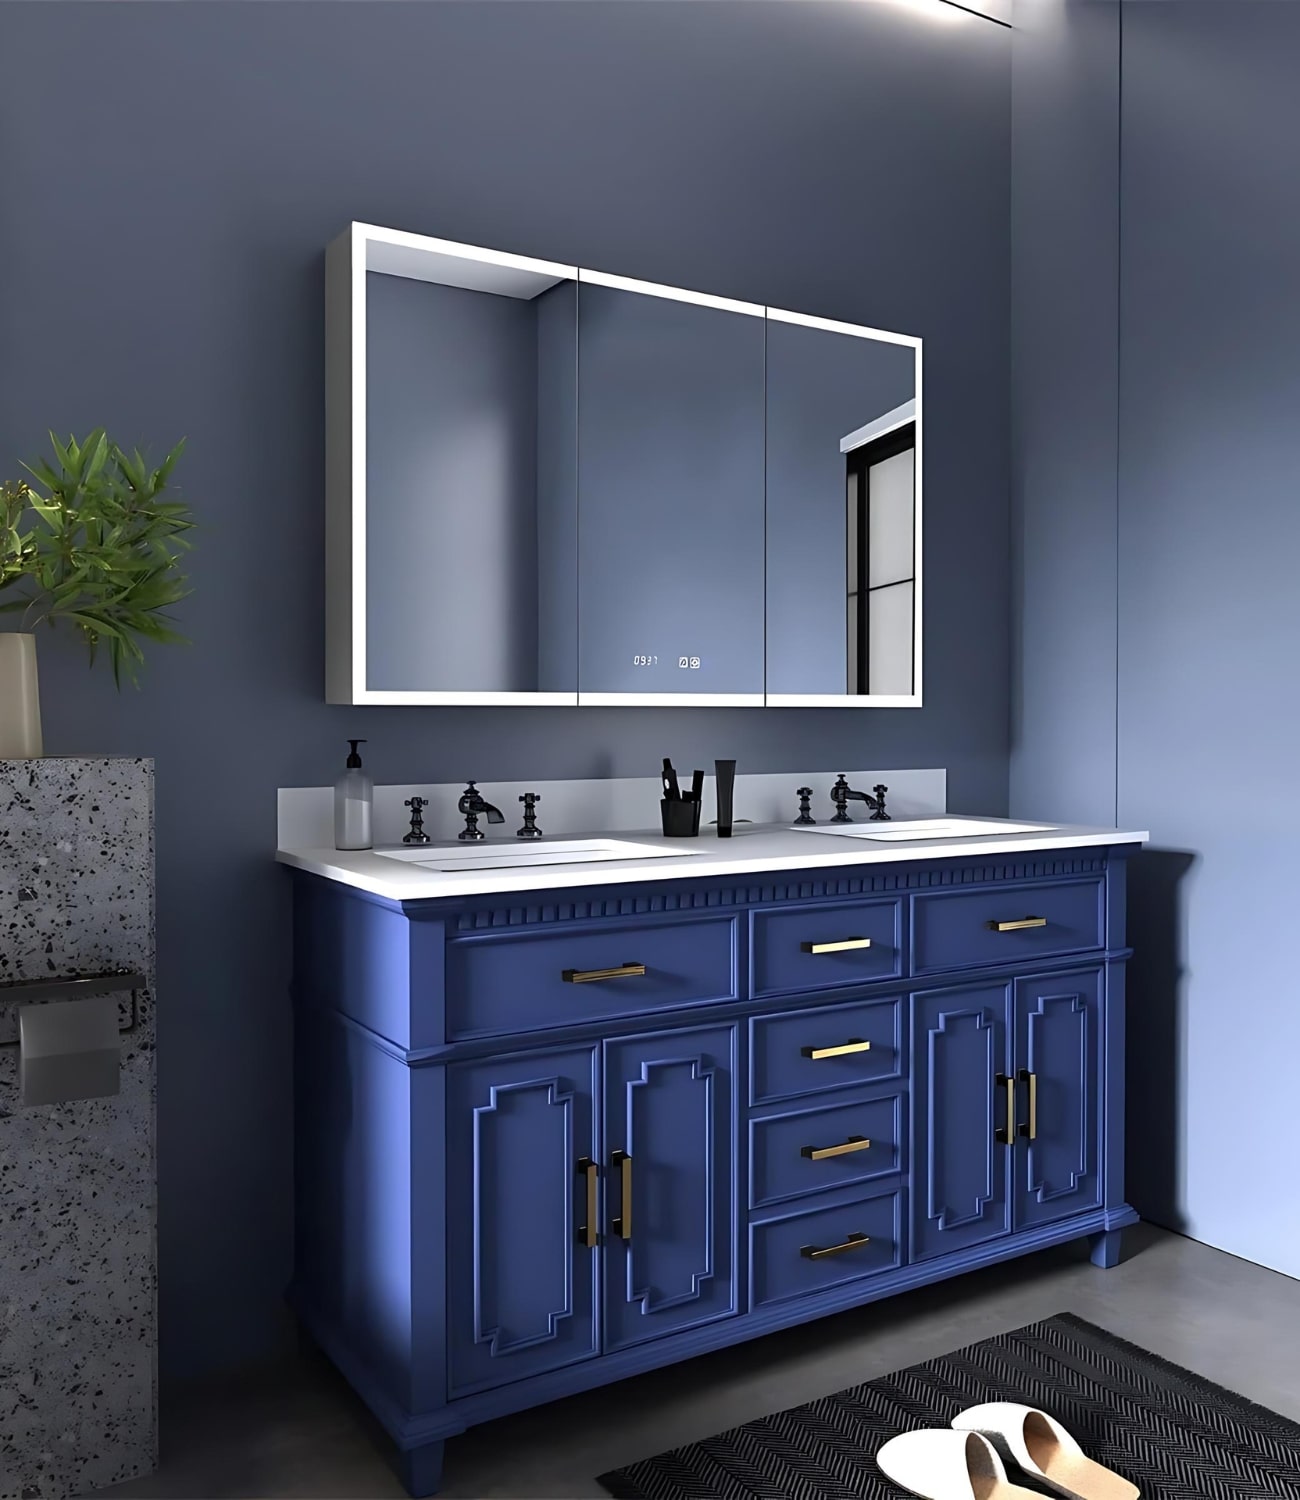 Freestanding bathroom vanities are timeless and ready for your bathroom remodel.